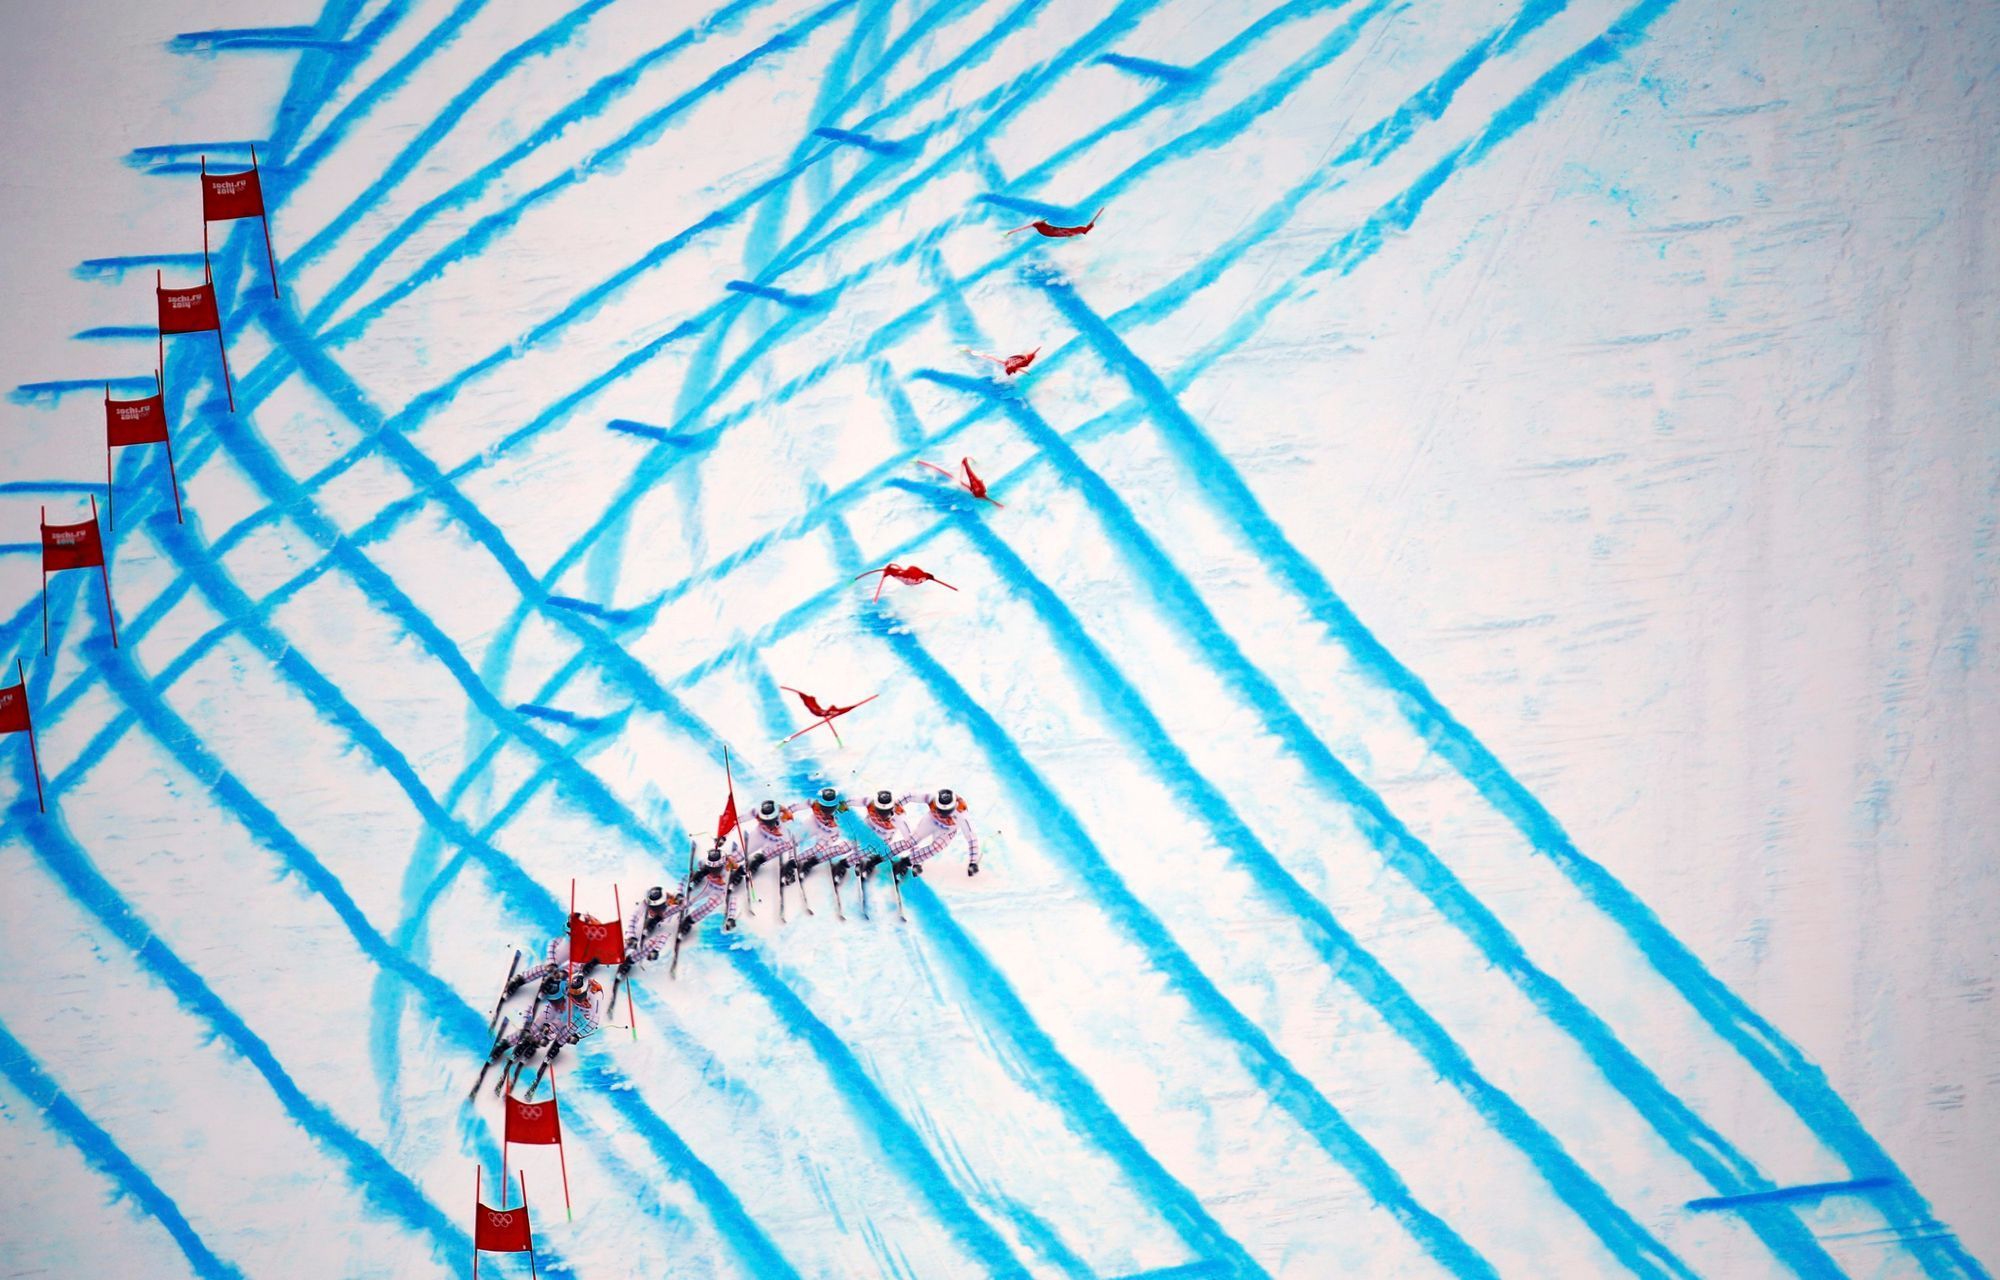 Bank of the Czech Republic speeds down the course during the men's alpine skiing Super-G competition at the 2014 Sochi Winter Olympics